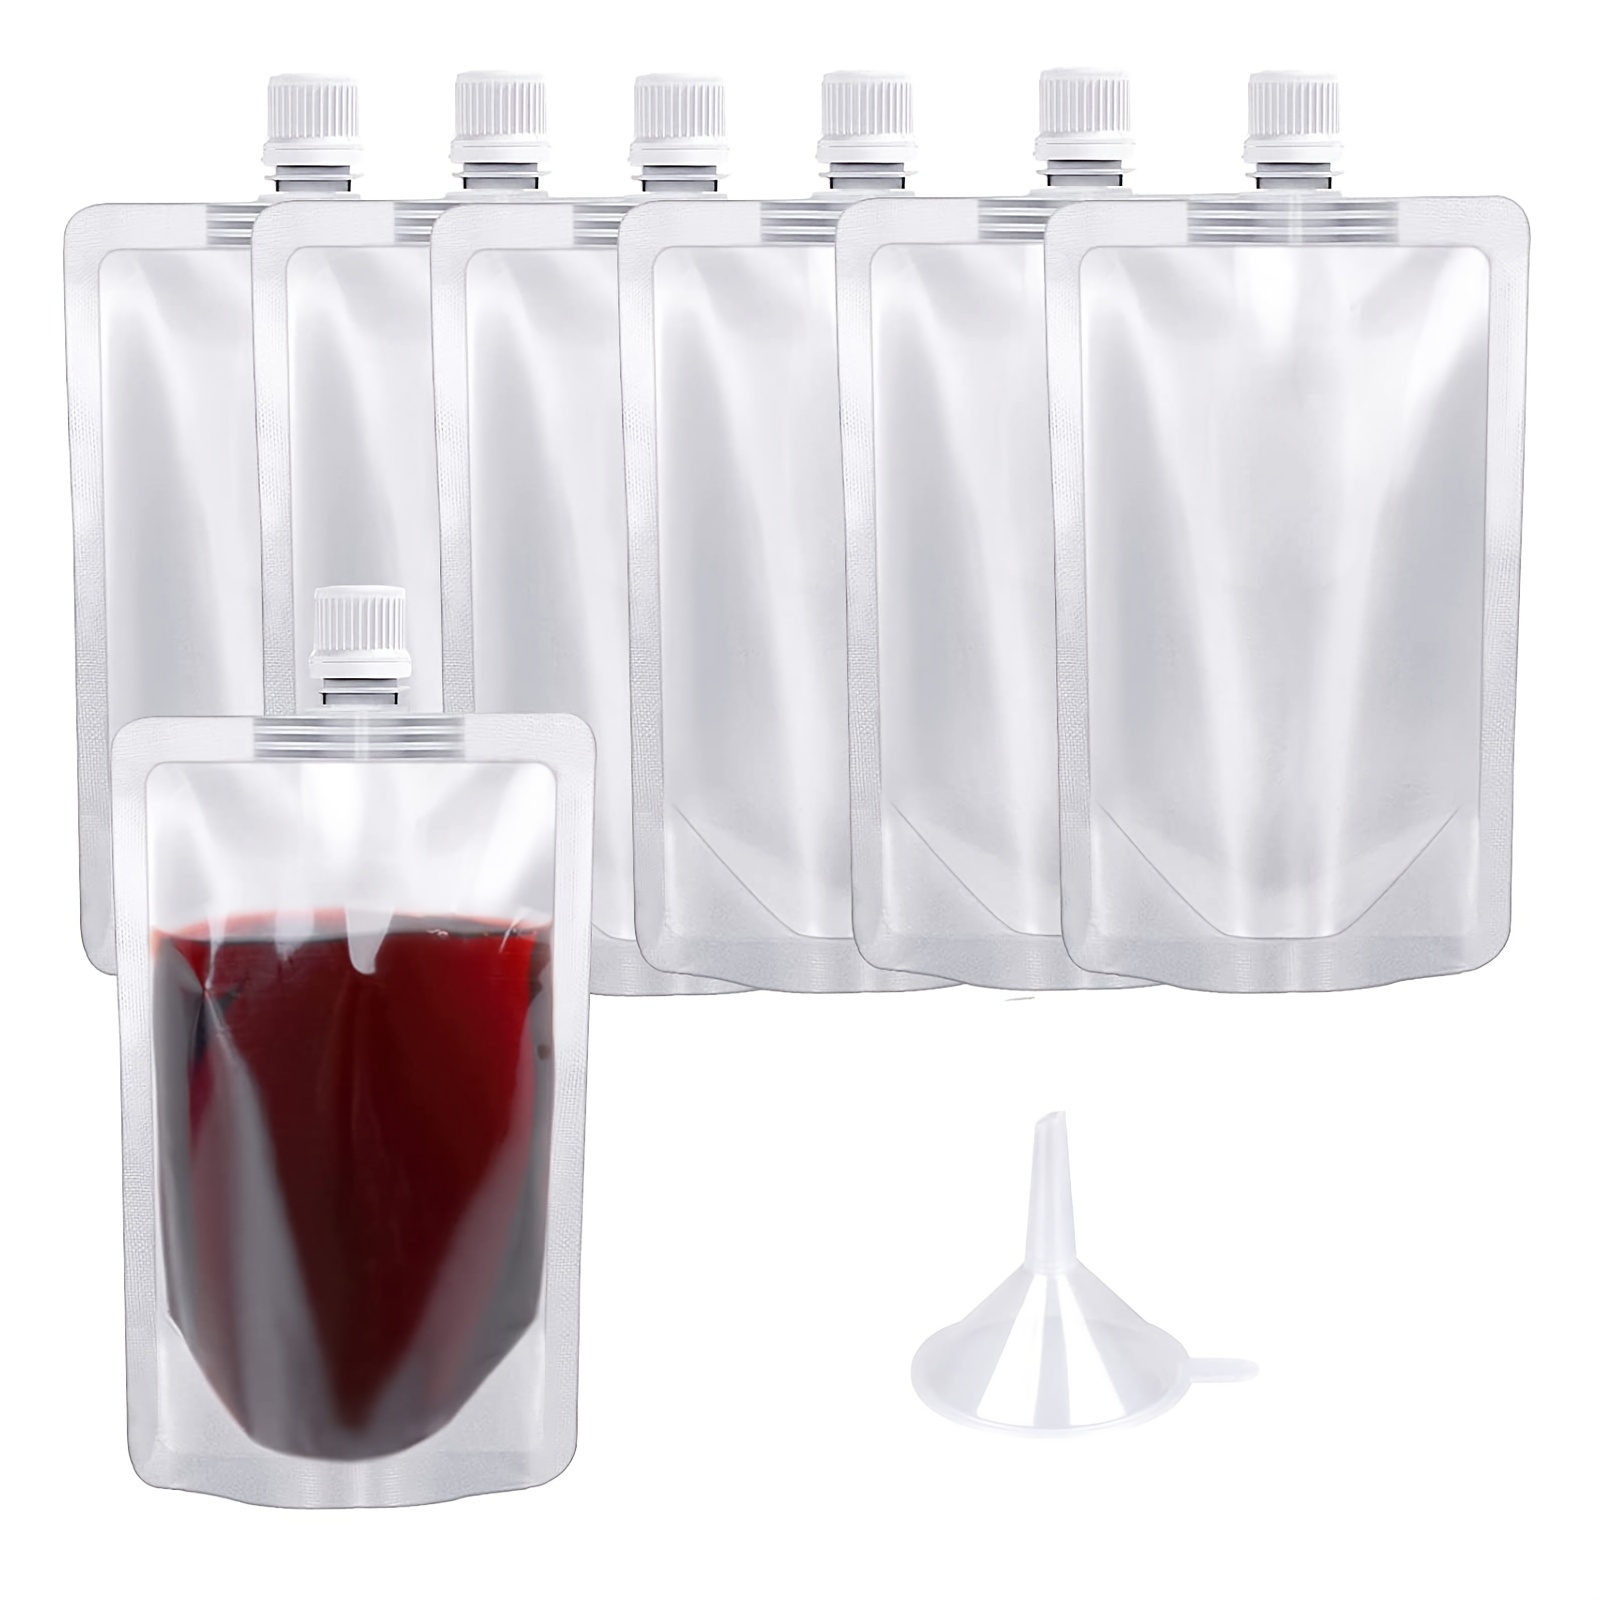 OXJJCCXO Alcohol Pouches,Plastic Flasks for Liquor Hidden,Drink Pouches for  Adults Alcohol,Rum Runners for Cruise Leak Proof set,Reusable and